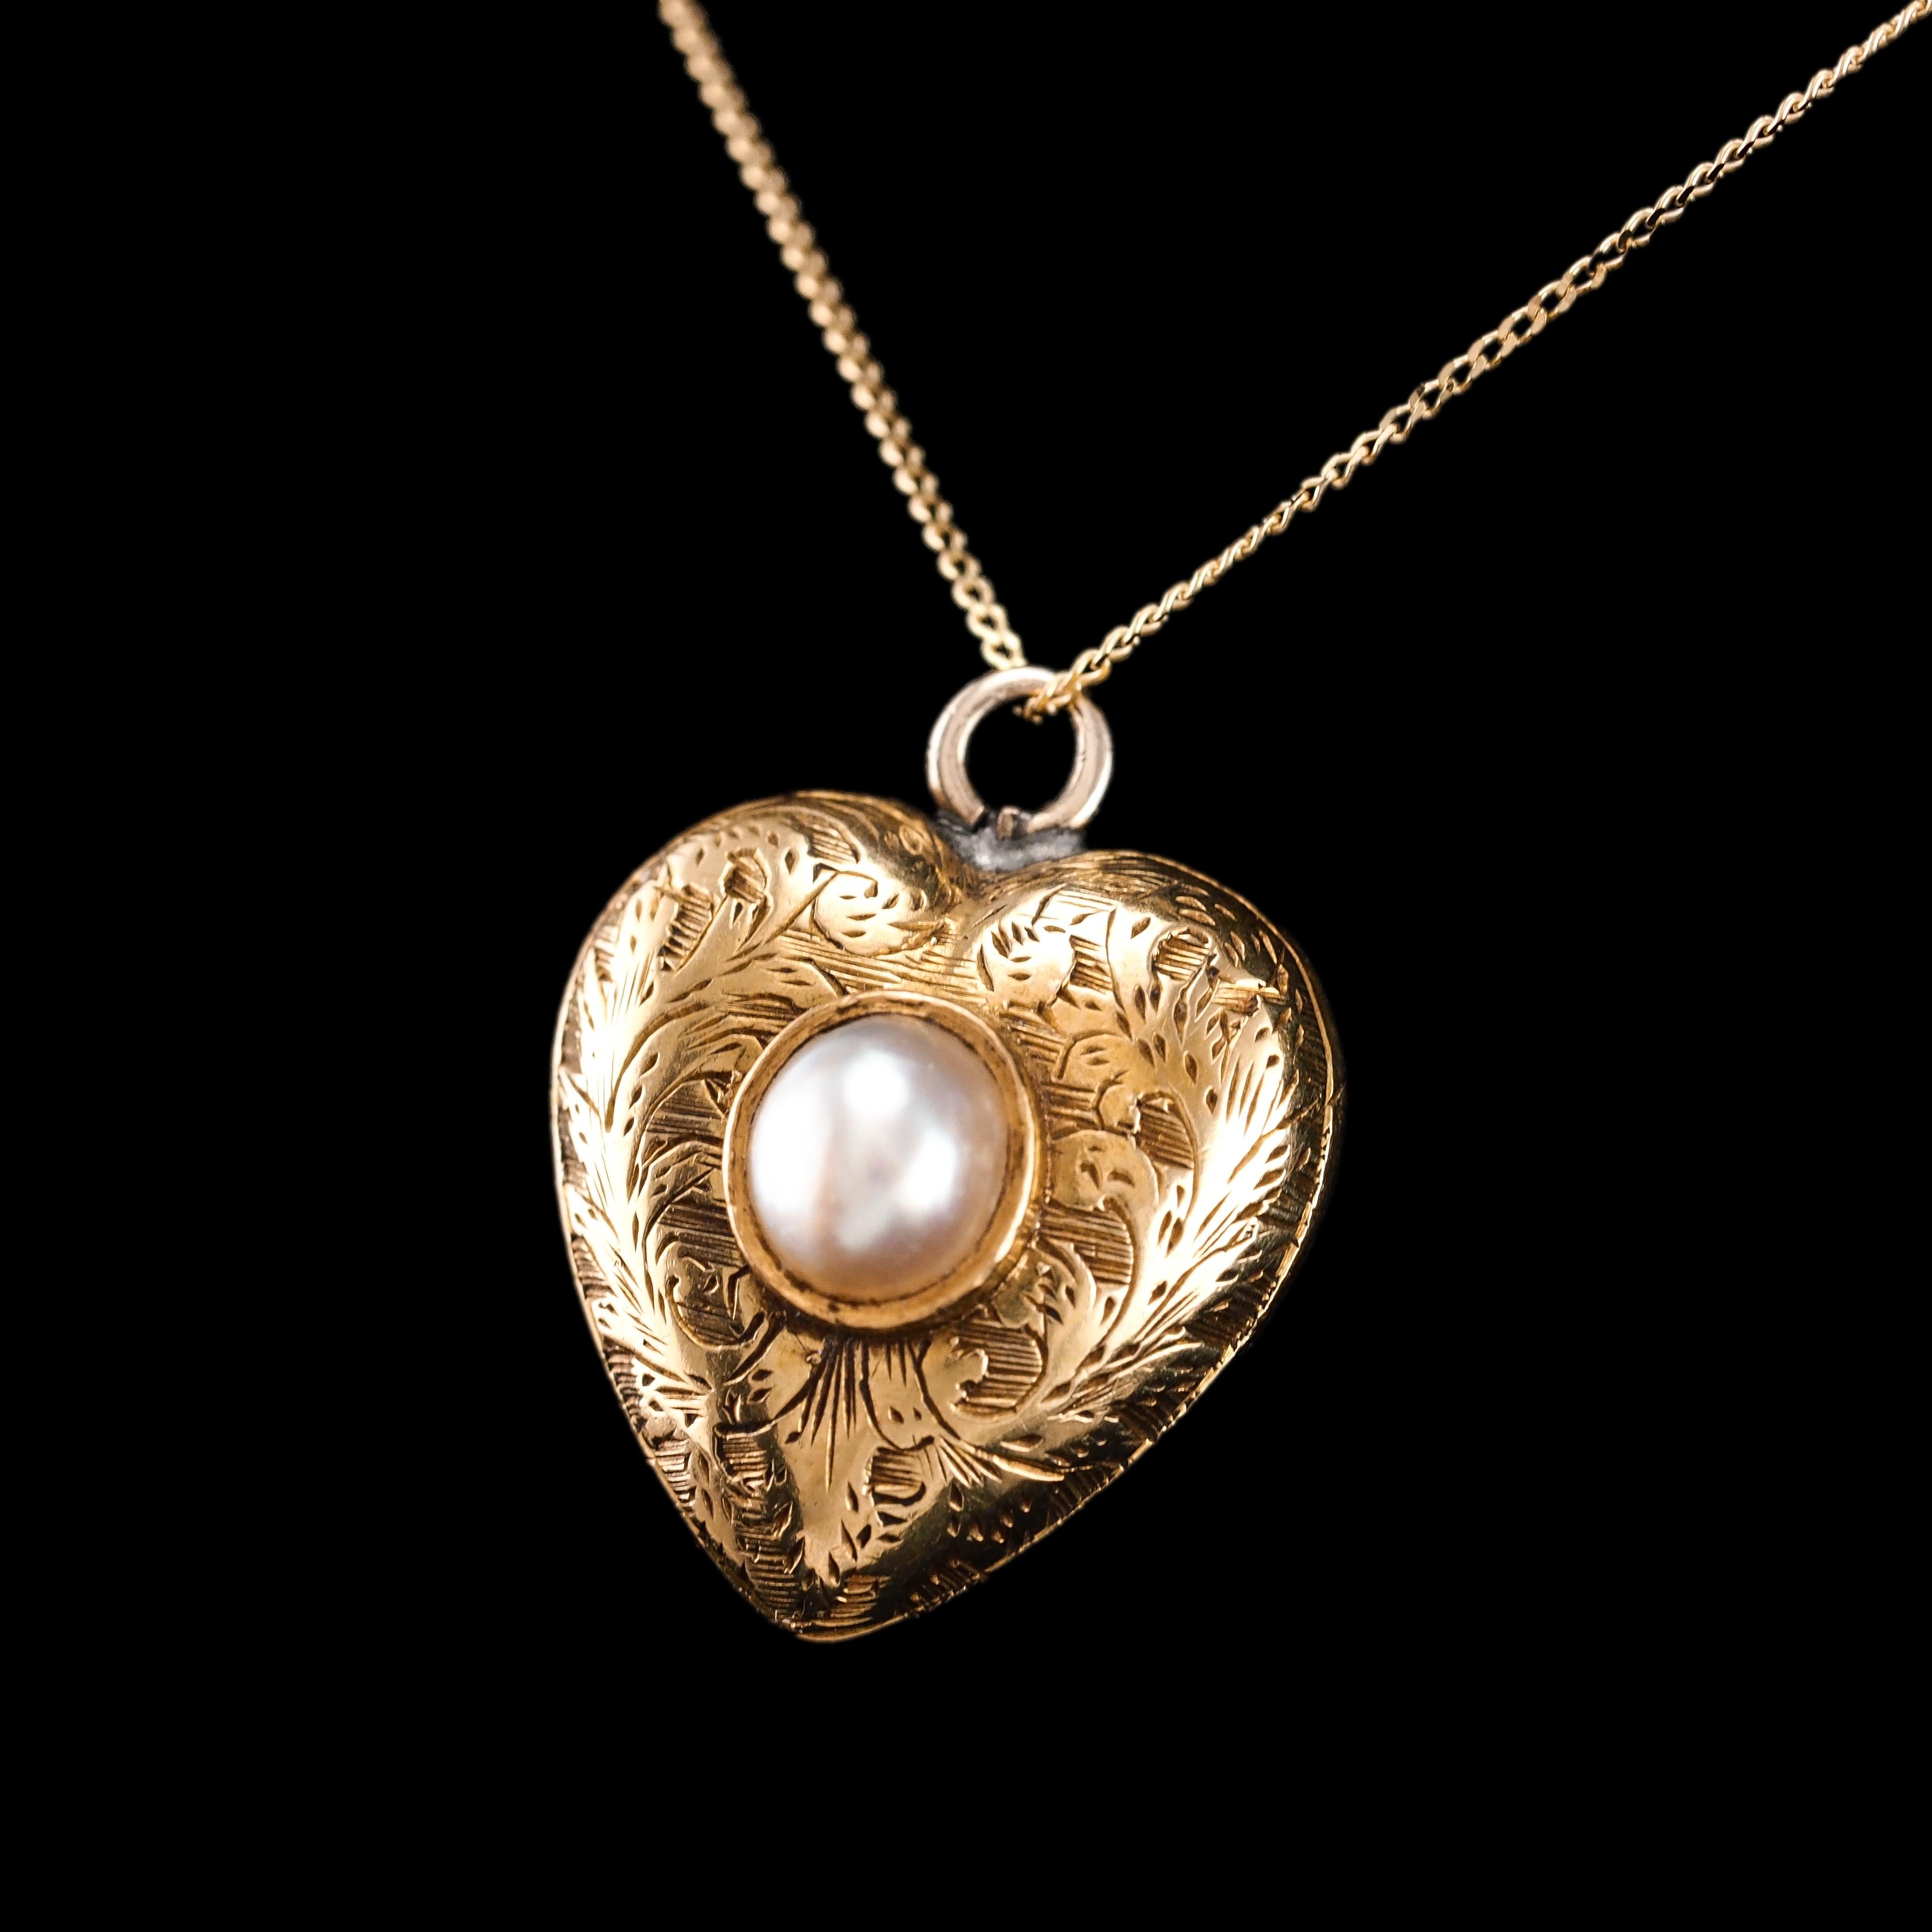 Round Cut Antique 18K Gold Heart Charm Pendant Necklace with Pearl - Victorian c.1890